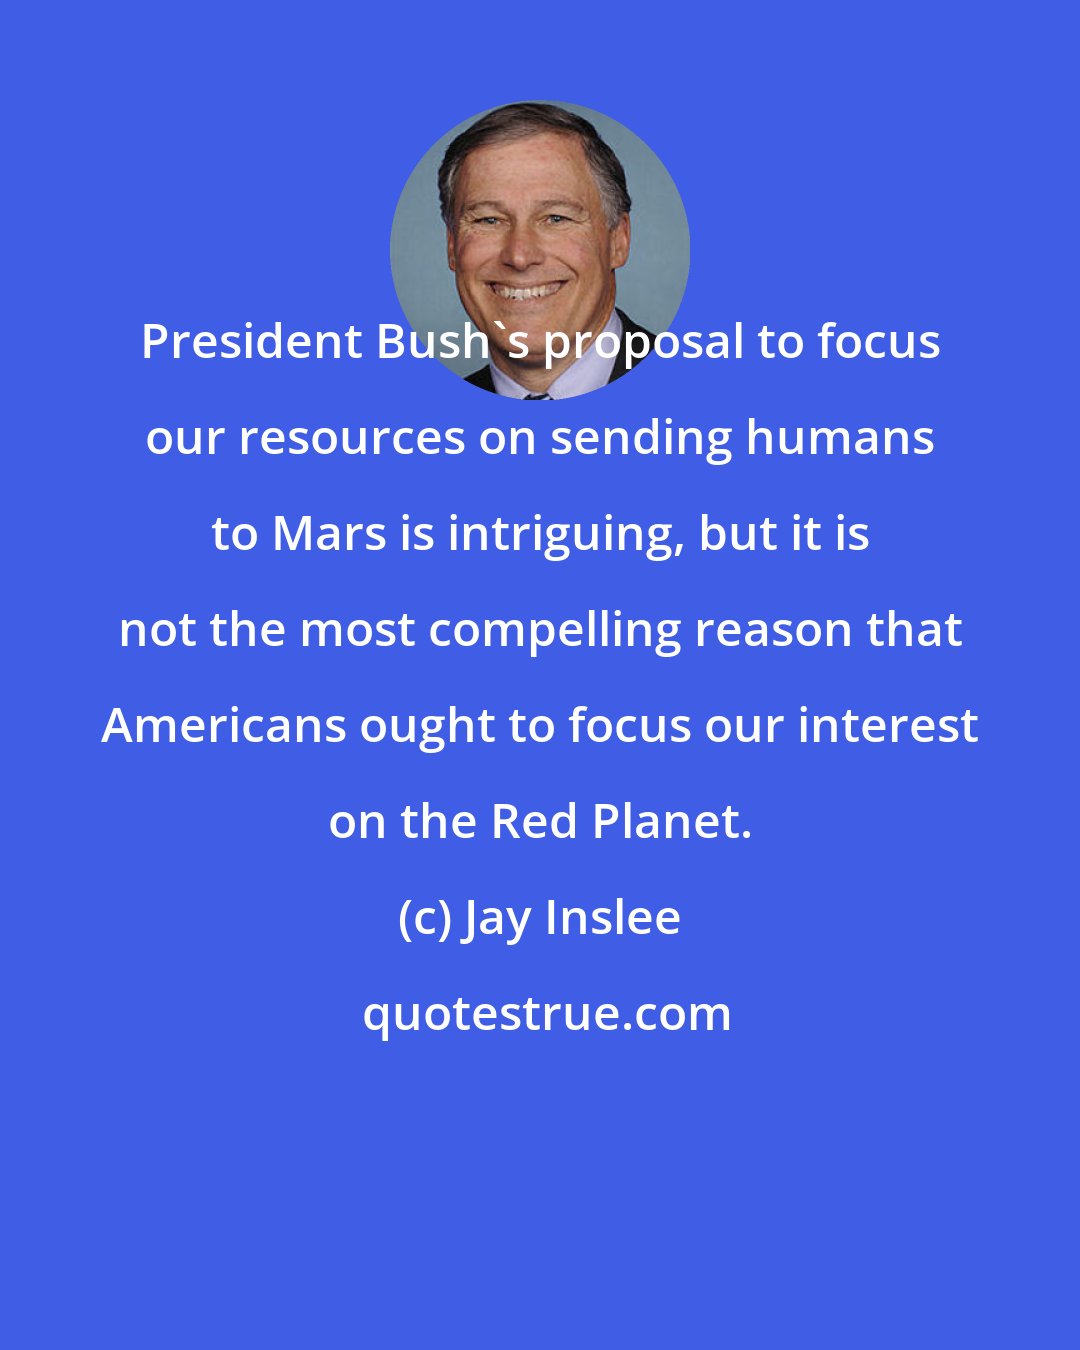 Jay Inslee: President Bush's proposal to focus our resources on sending humans to Mars is intriguing, but it is not the most compelling reason that Americans ought to focus our interest on the Red Planet.